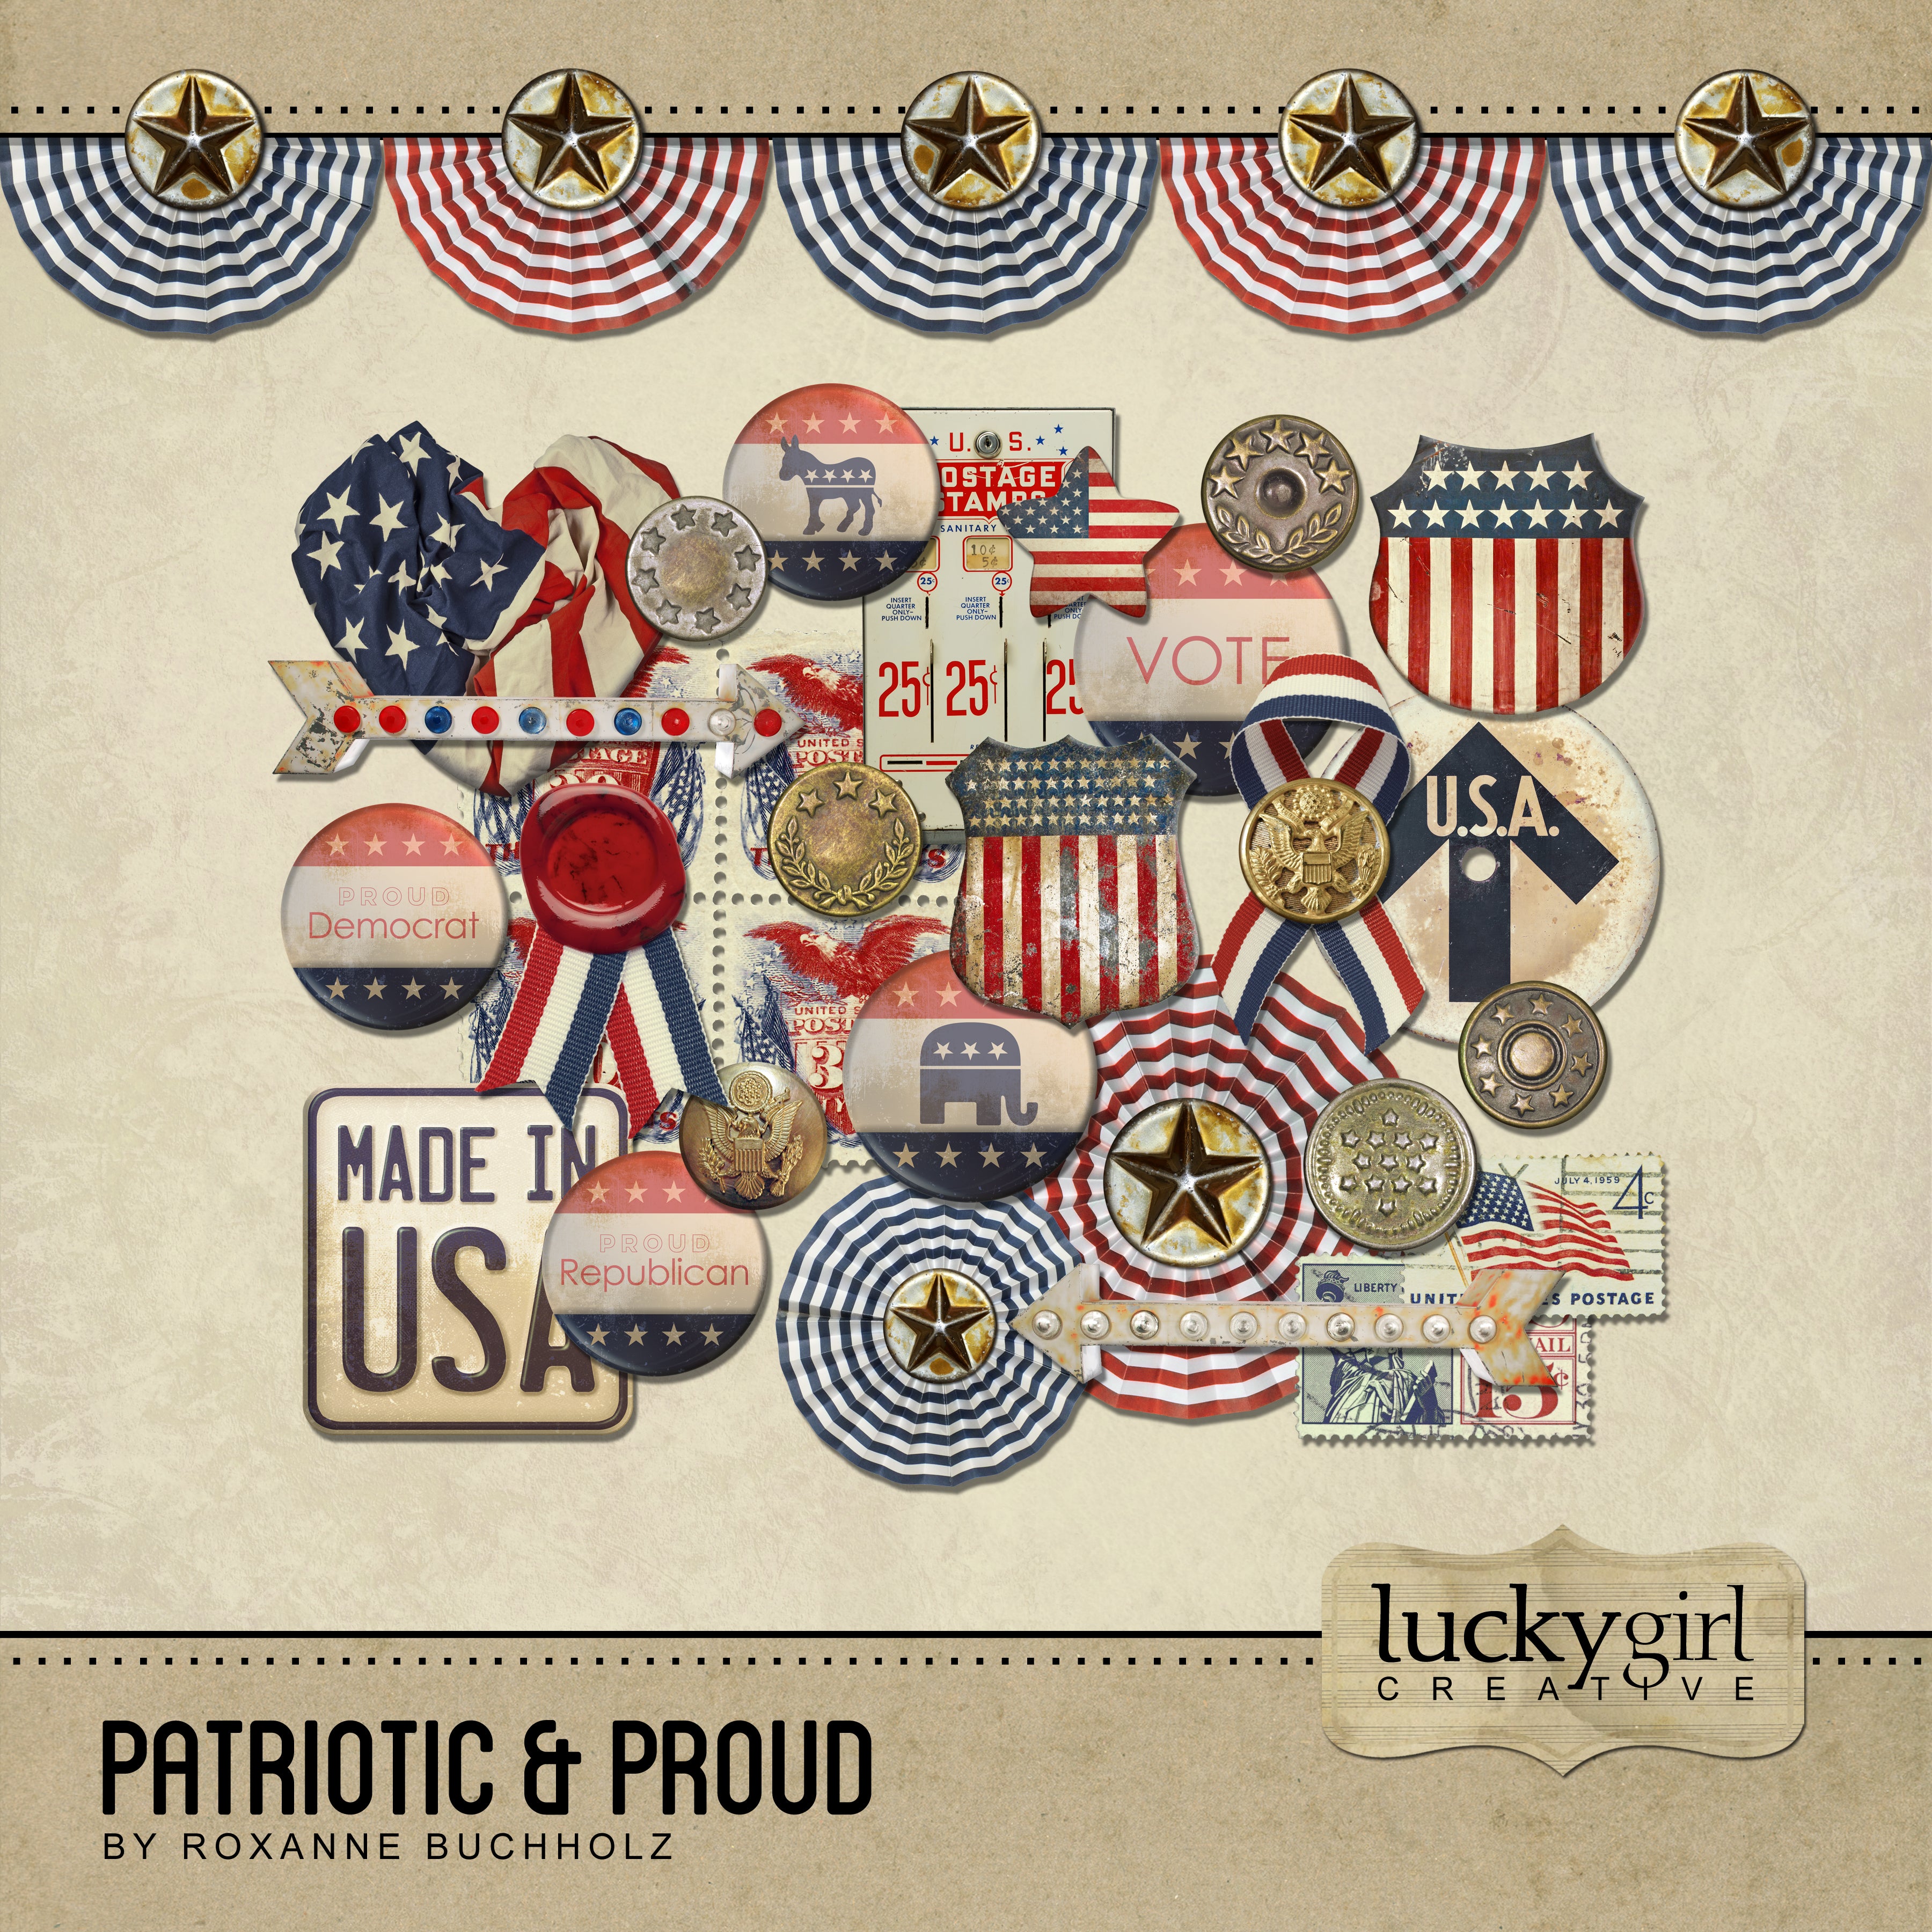 Patriotic and Proud is what you'll feel when you use this digital art embellishments only kit to accent your Fourth of July and Independence Day activities or your right to vote in the election! Filled with vintage inspired embellishments including United States postage stamps and stamp machine, lighted signage arrows, patriotic ribbons, star buttons, antique metal signs, voter buttons for the Democrat or Republican, and red, white, and blue buntings for the holiday to celebrate America's independence.